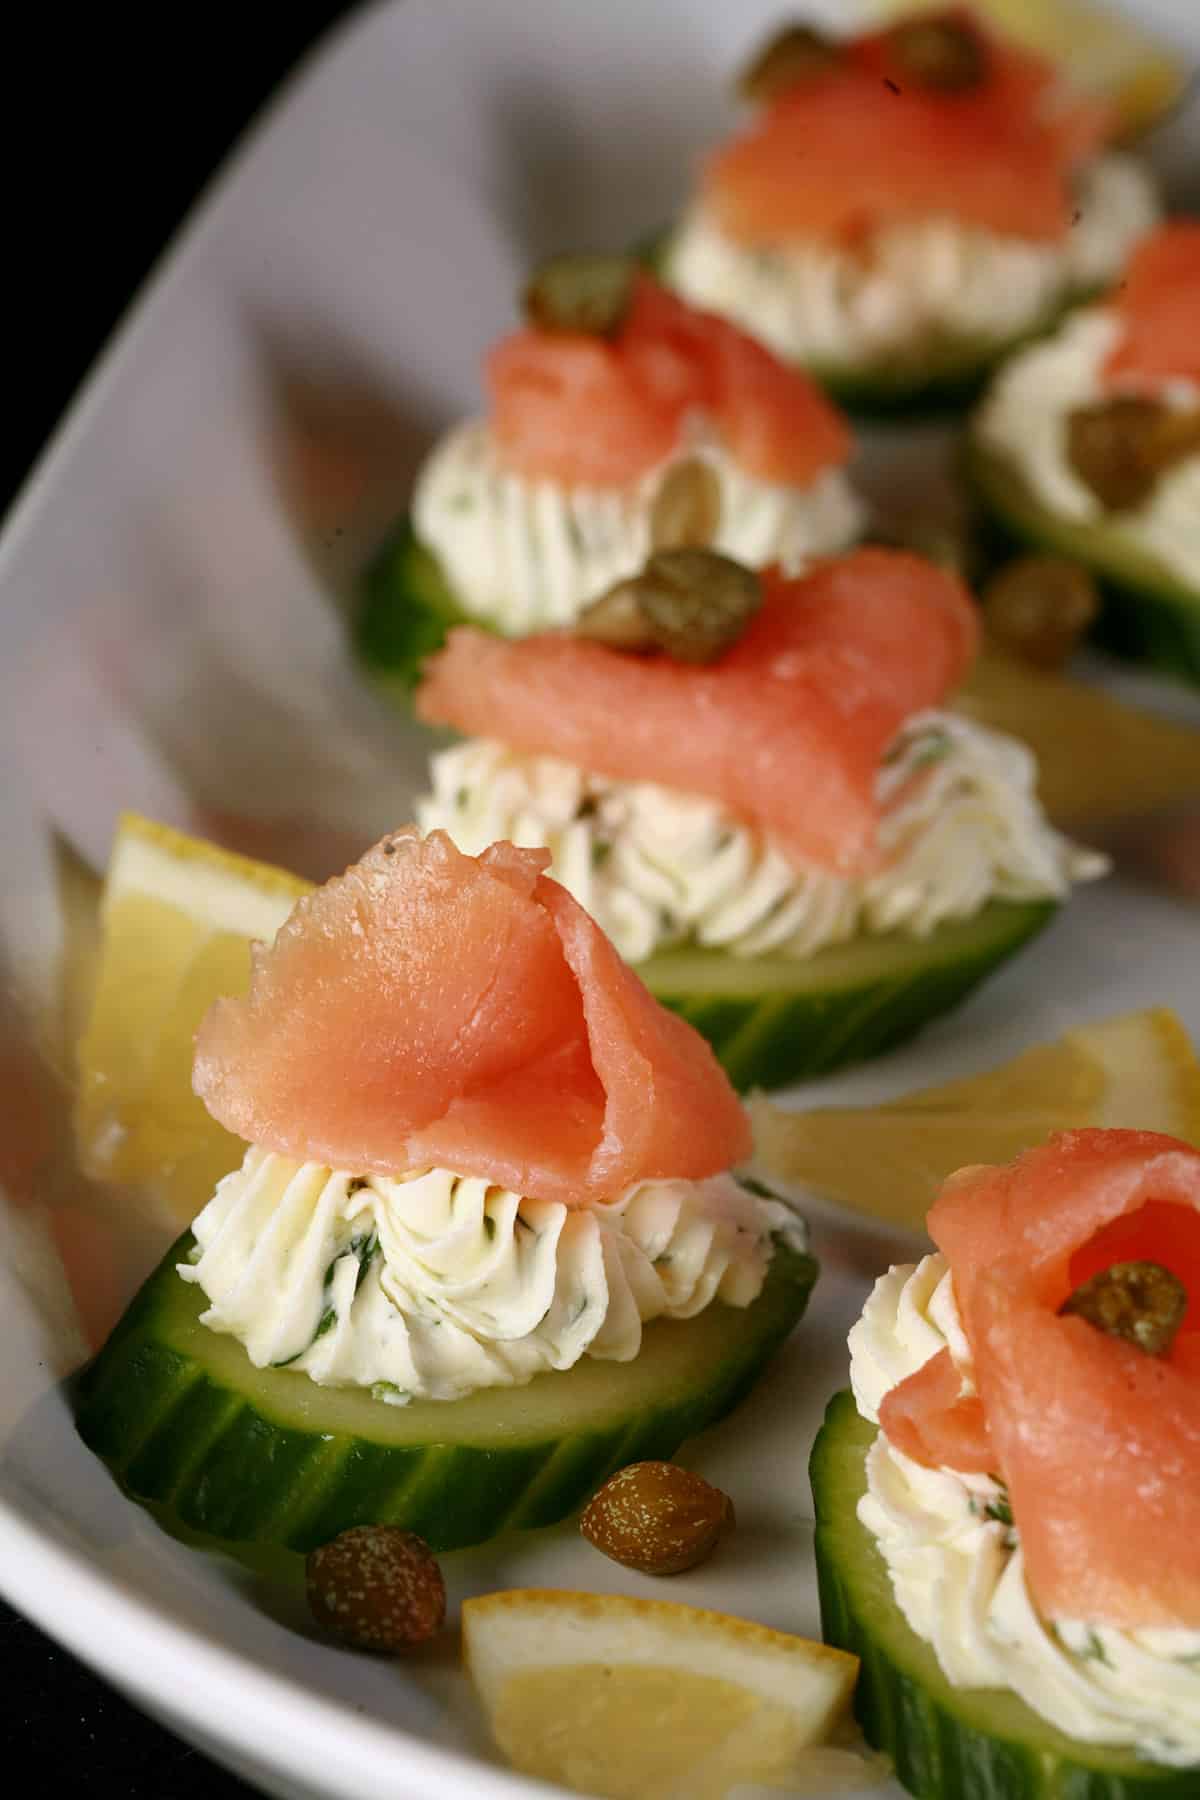 A plate of smoked salmon canapes on cucumber slices.